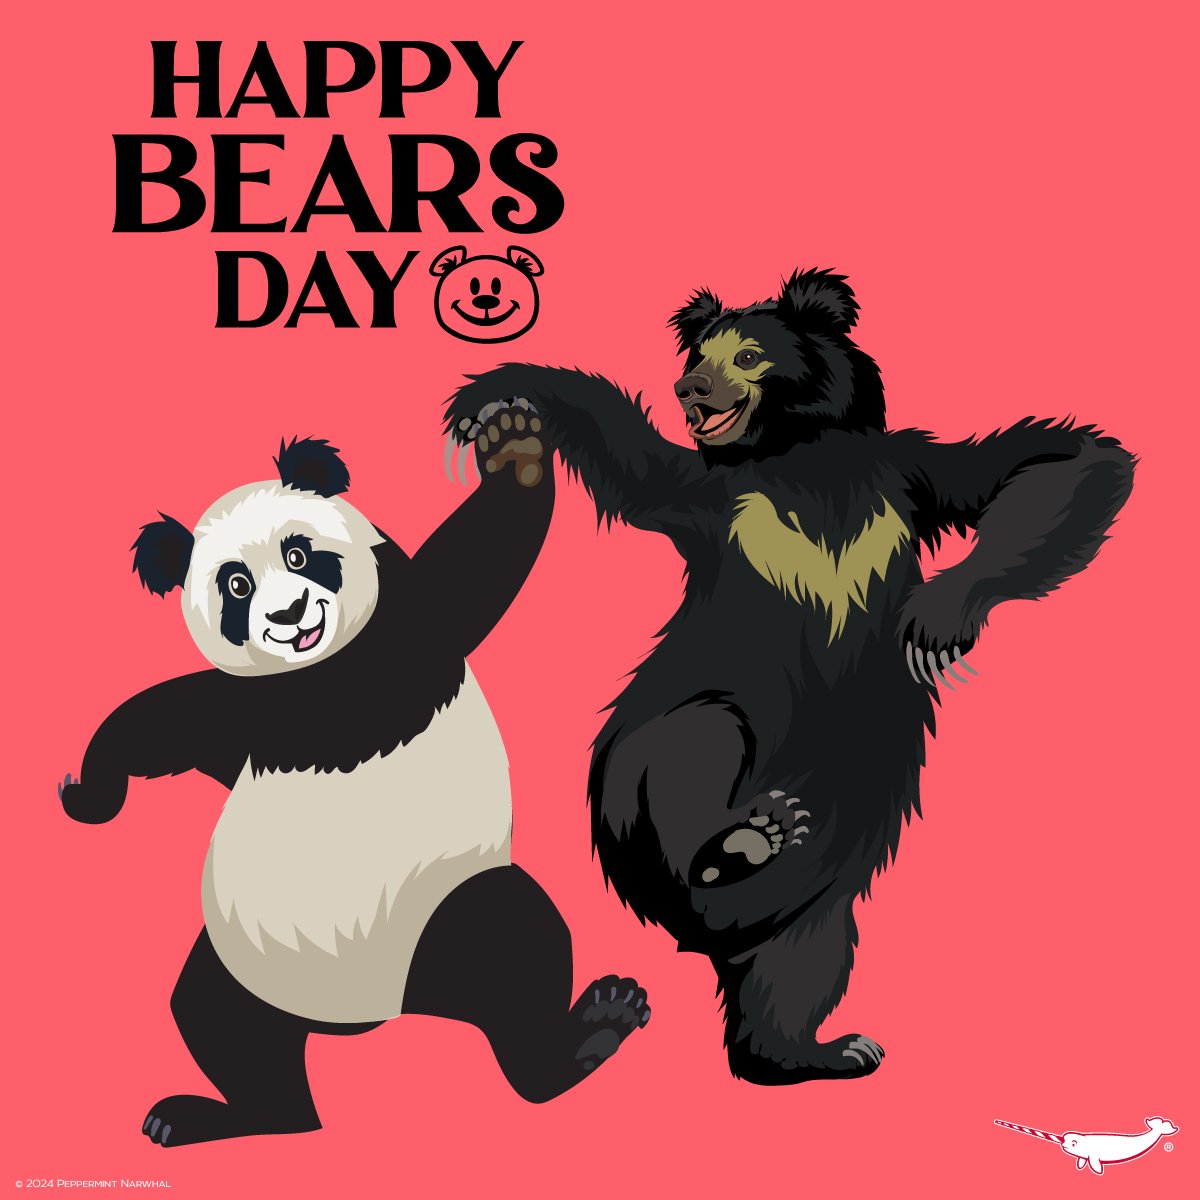 #HappyBearsDay #GiantPanda #SlothBear #Bears MERCH: peppermintnarwhal.com/s/search?q=bear and for more great animal products Shop the #PeppermintNarwhal store: peppermintnarwhal.com International Shoppers visit our store on Etsy: etsy.com/shop/Peppermin… #HappyBears #Bear #HappyBear